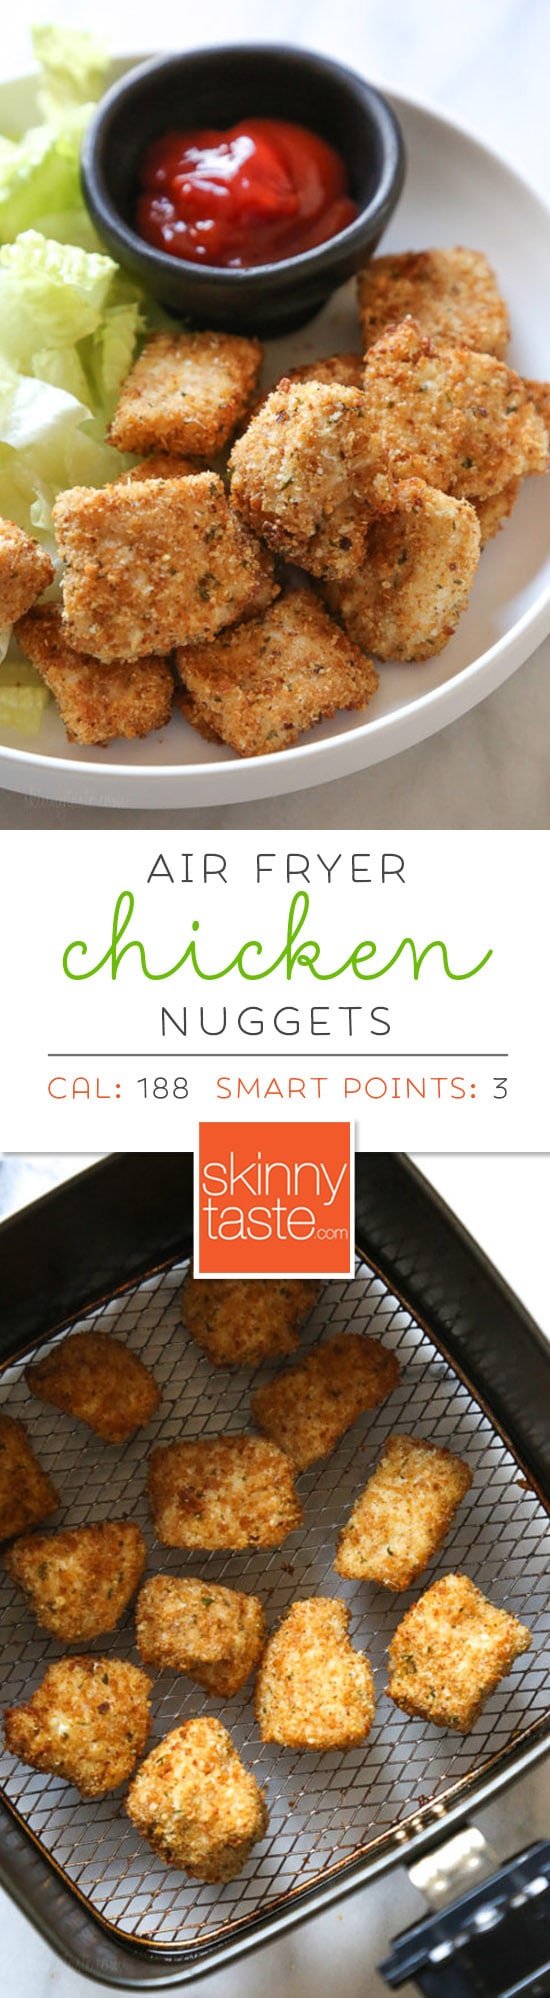 Making homemade Chicken Nuggets in the air-fryer is so much healthier than fast food or frozen nuggets, and so easy to make. Made with chunks of chicken breasts coated in breadcrumbs and parmesan cheese then air fried until golden and crisp. These also happen to be egg-free, so they are also great for kids with egg allergies.